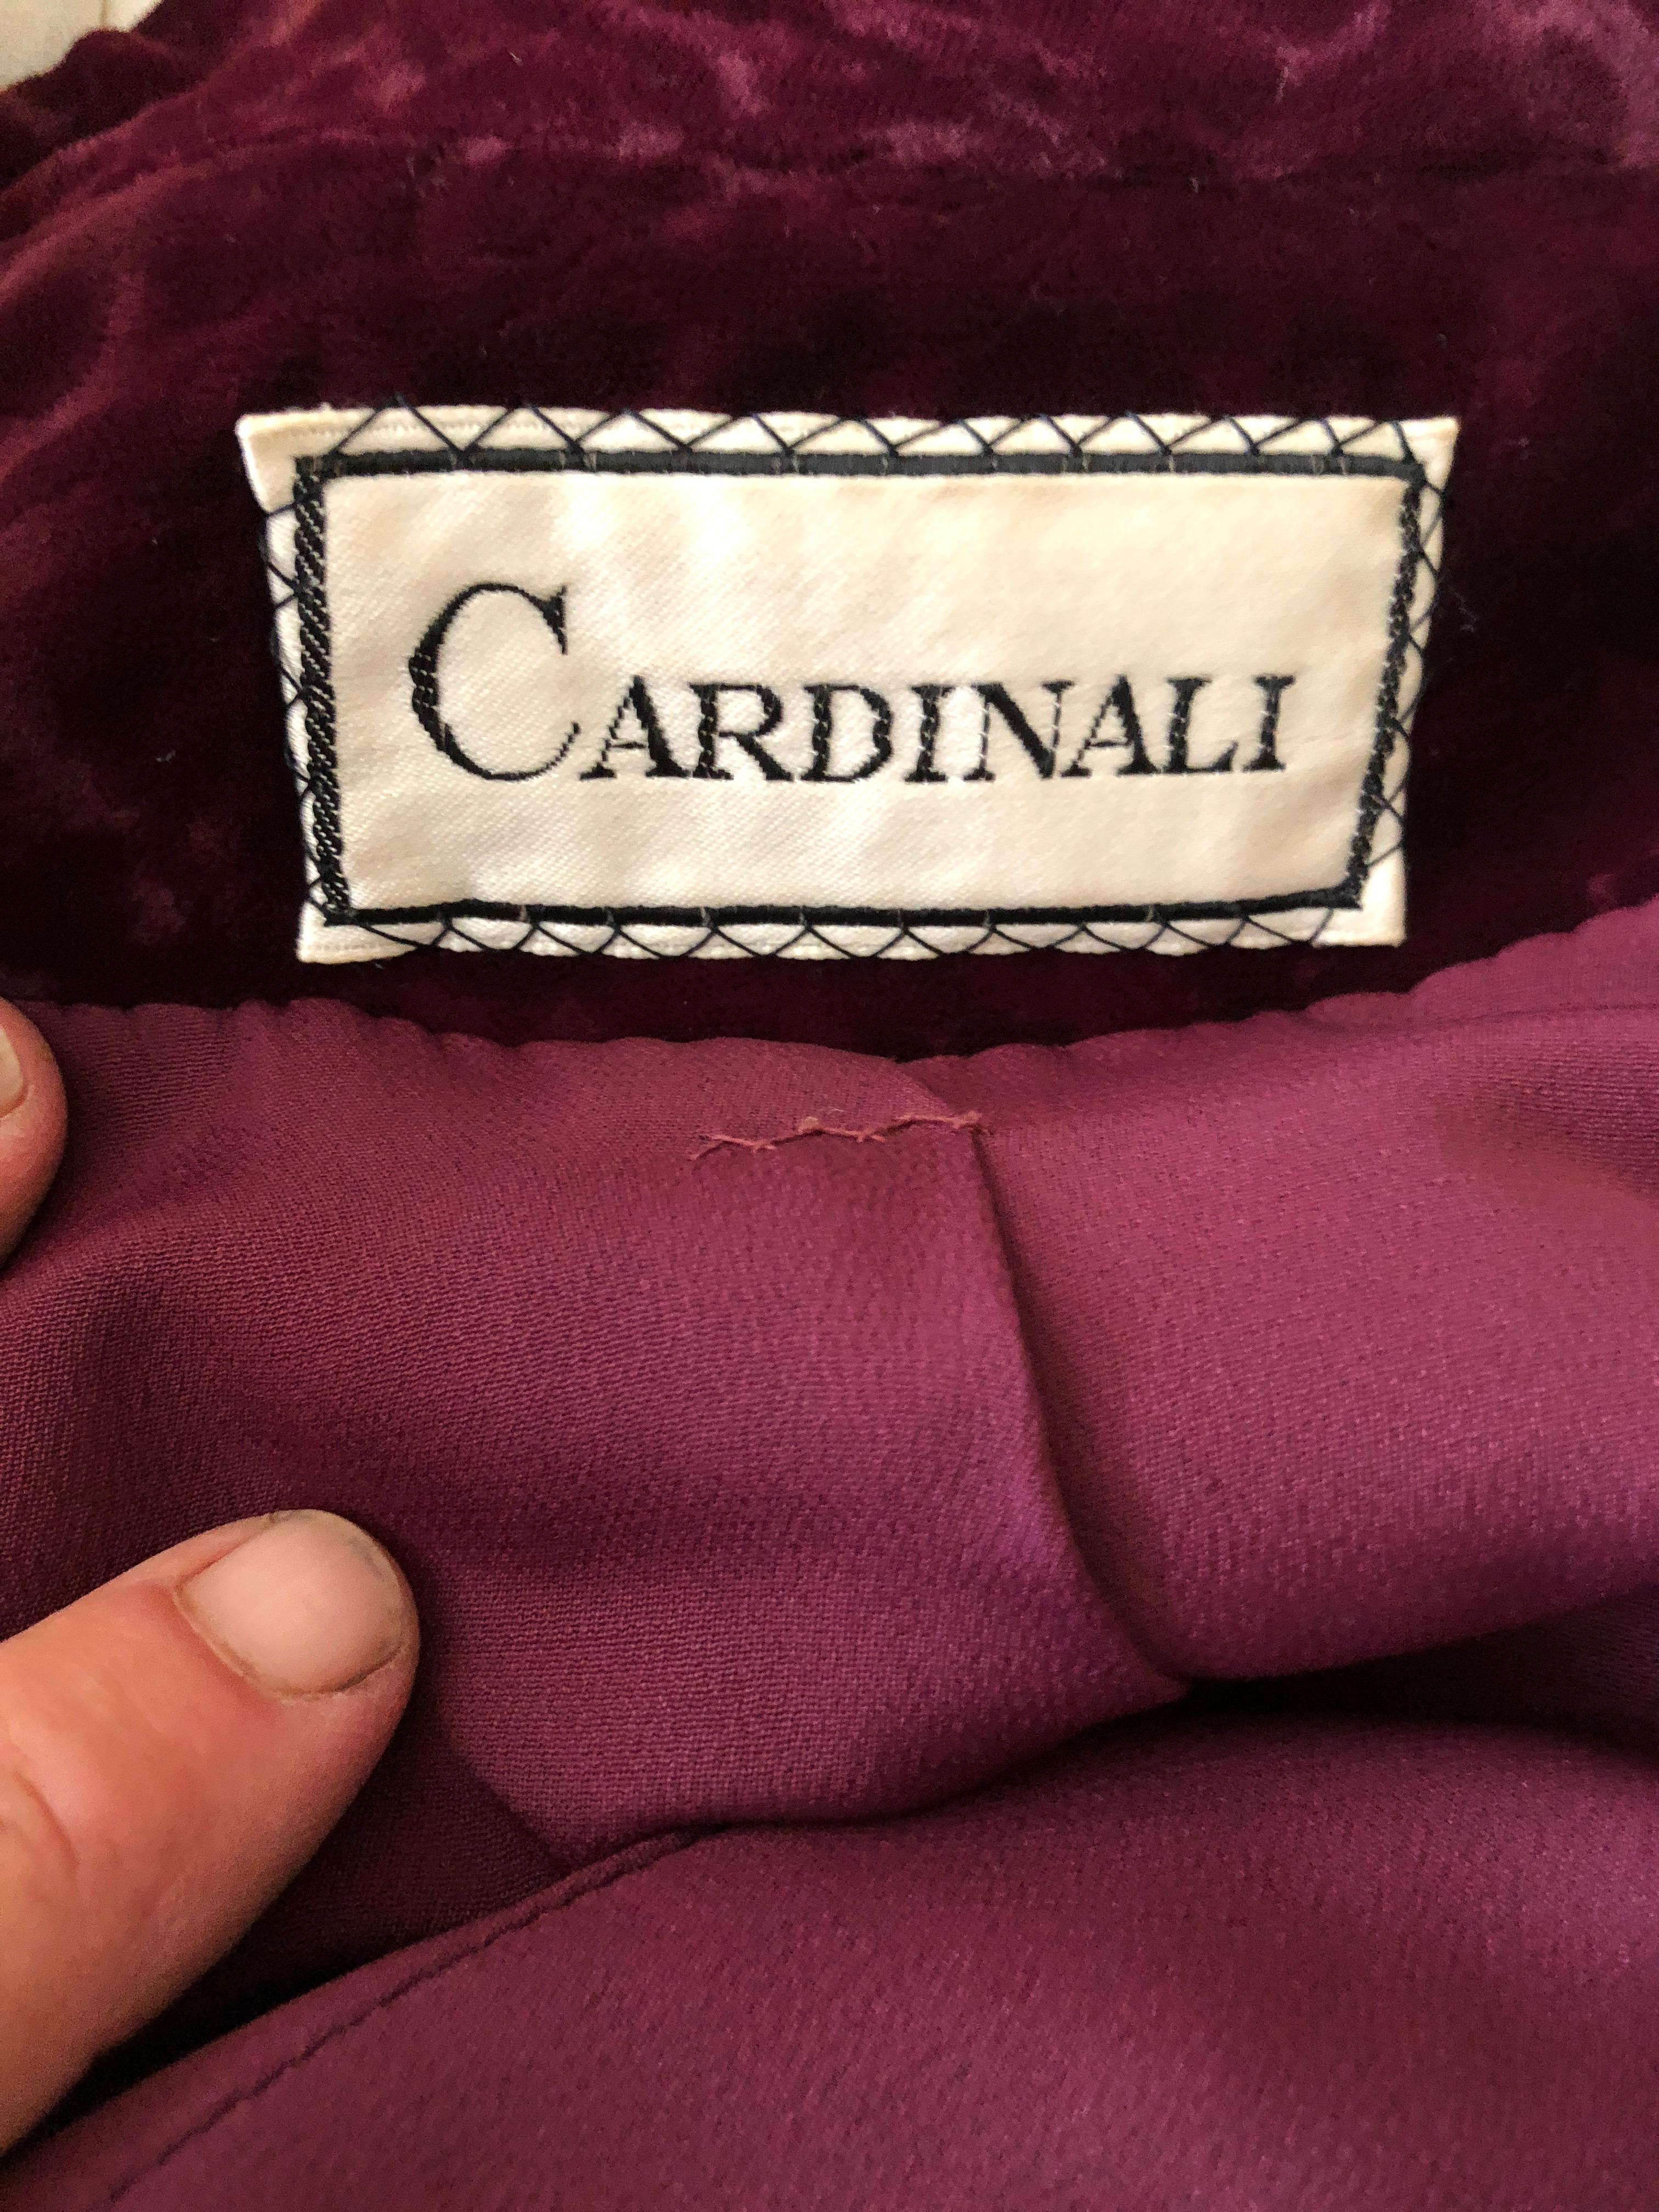 Cardinali Purple Silk Devore Velvet Three Piece Skirt Suit with Jacket Fall 1972 In Good Condition For Sale In Cloverdale, CA